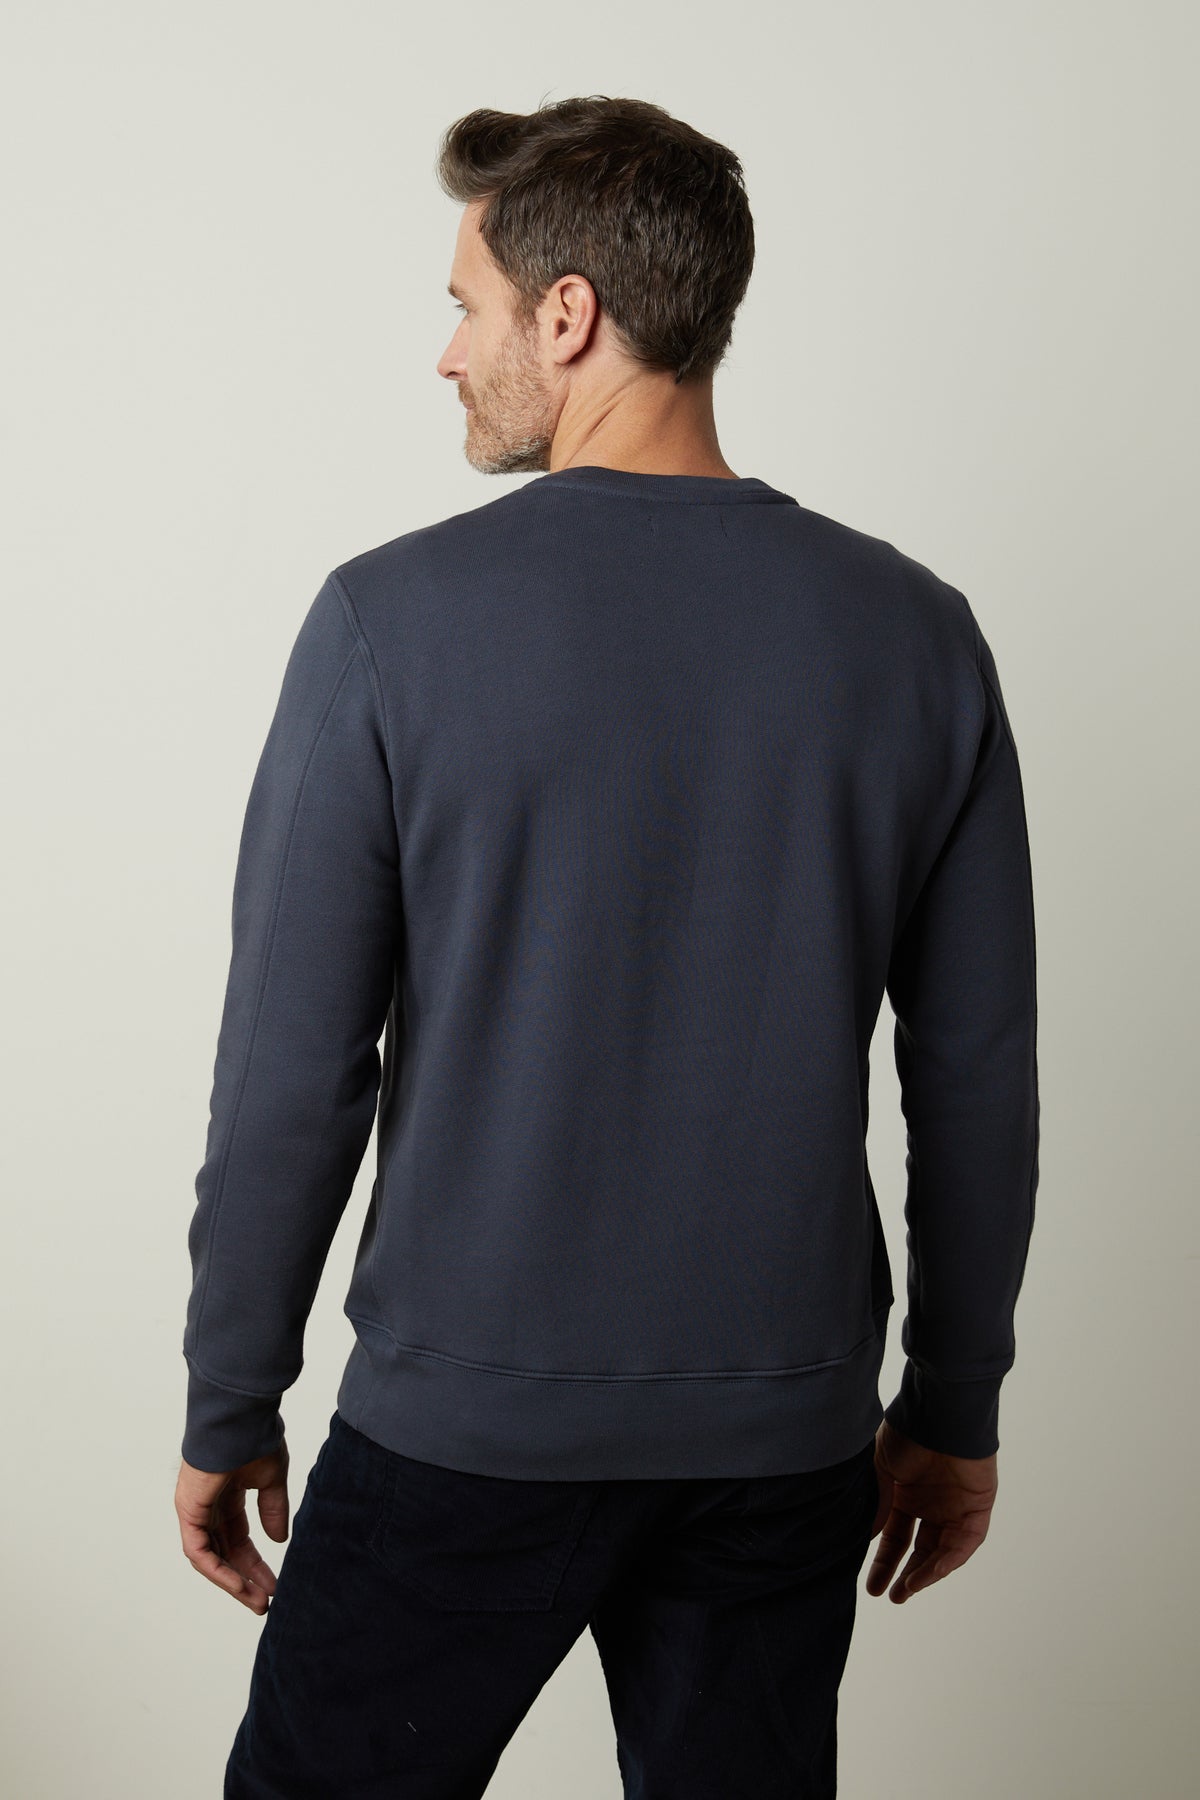 The back view of a man wearing a Velvet by Graham & Spencer KING CREW NECK SWEATSHIRT.-35472108159169